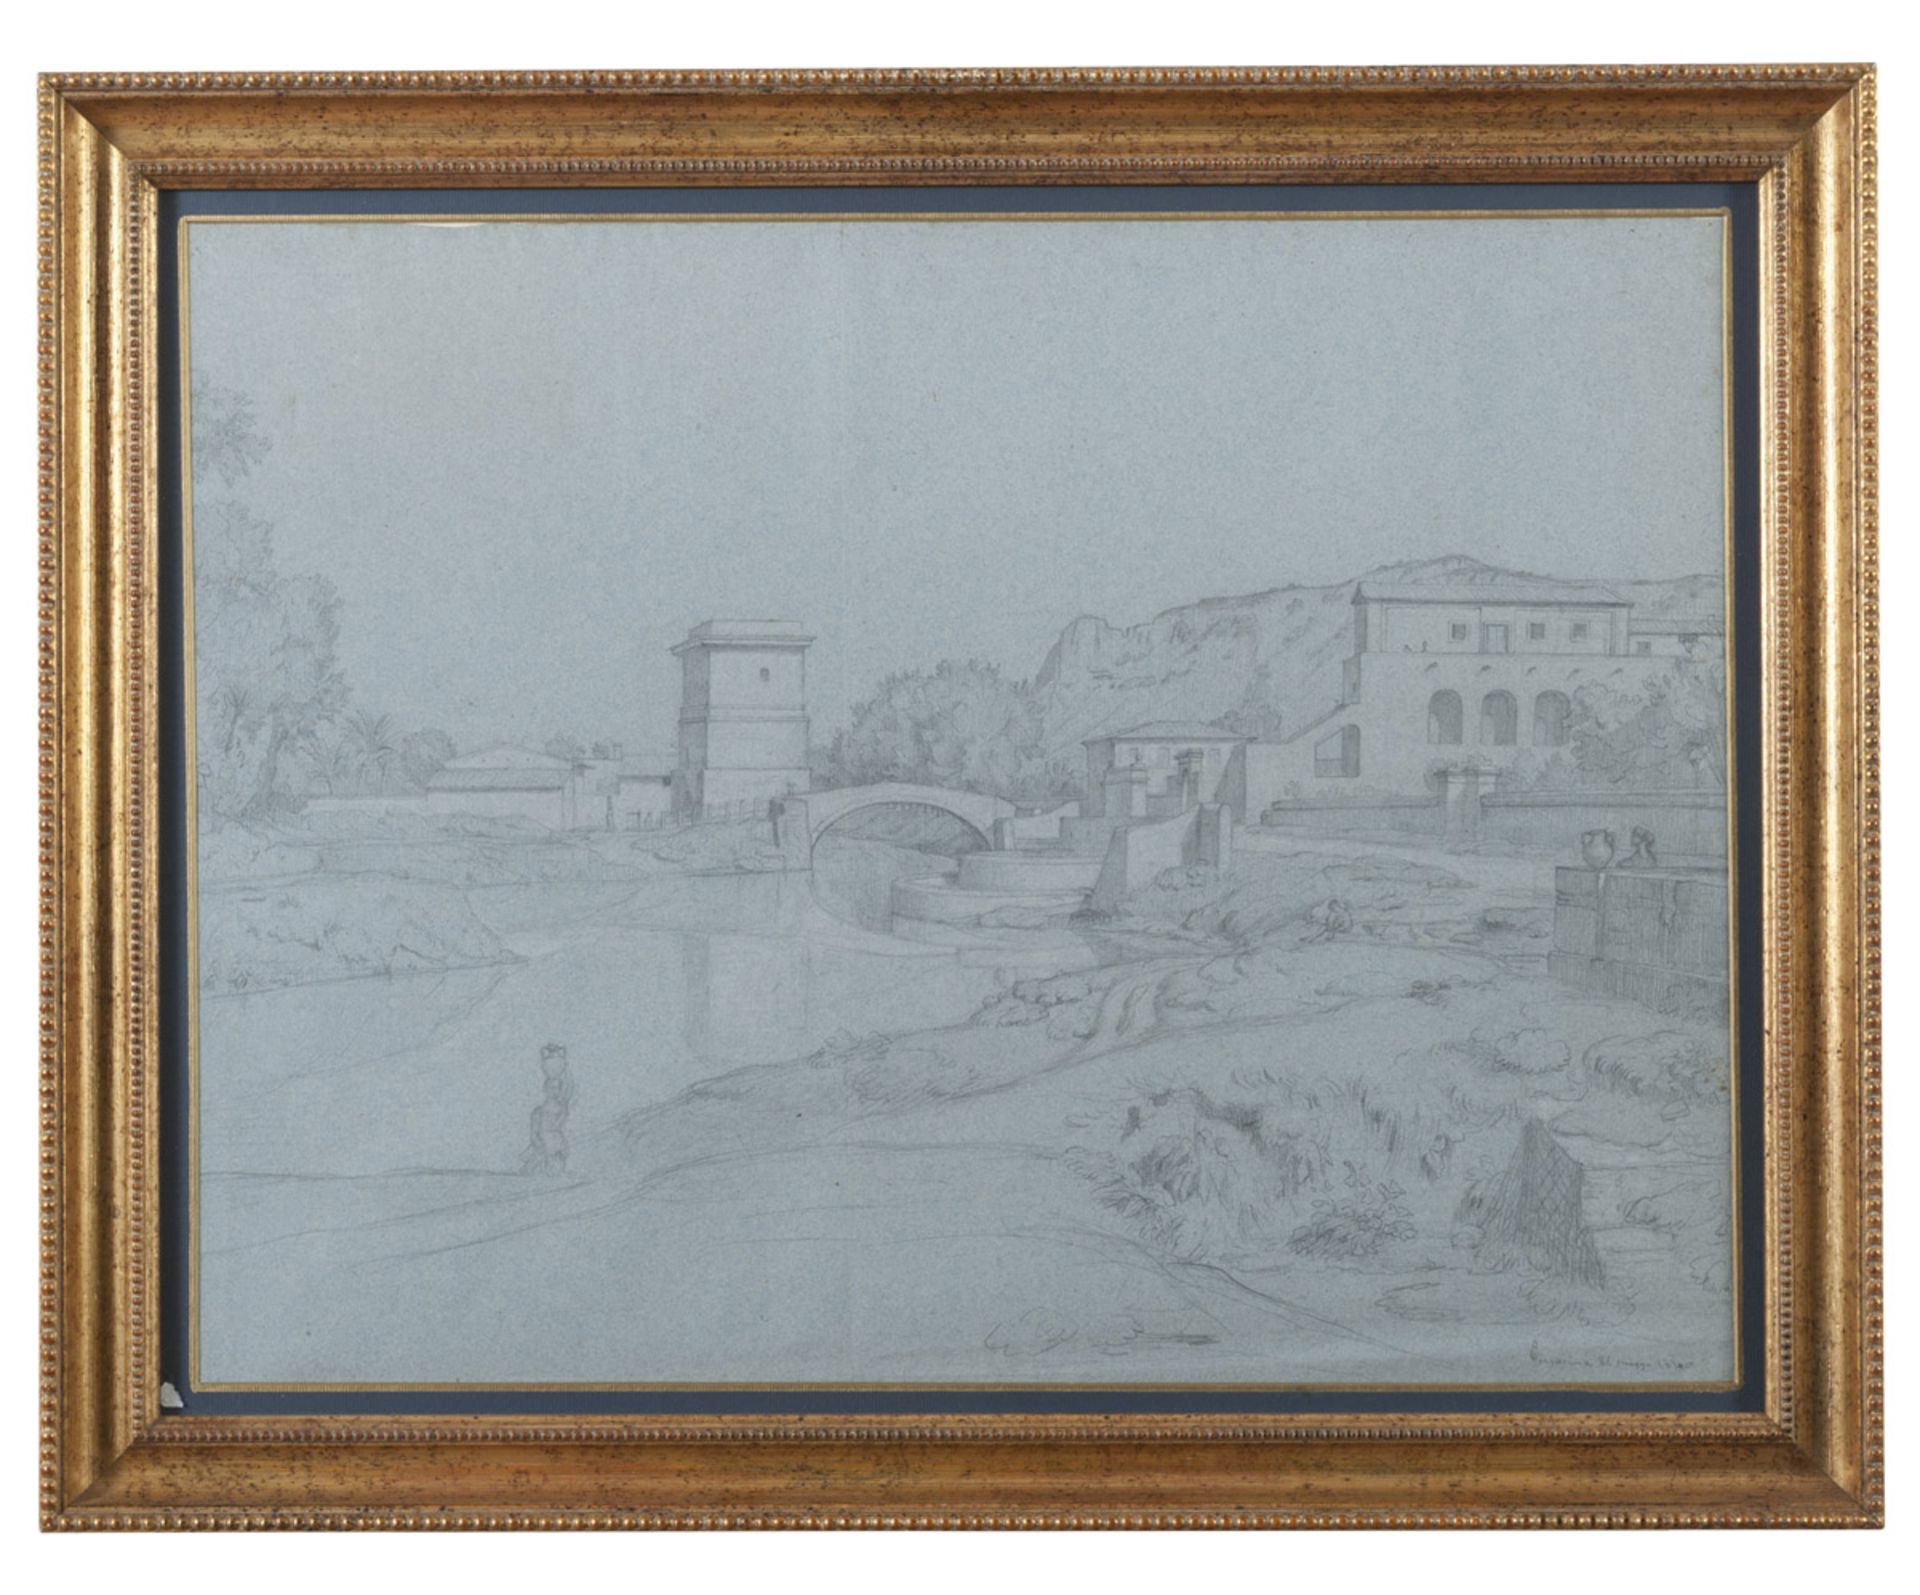 ITALIAN PAINTER, 19TH CENTURY VIEW OF TERRACINA Pencil on paper, cm. 44 x 56 Title and date of